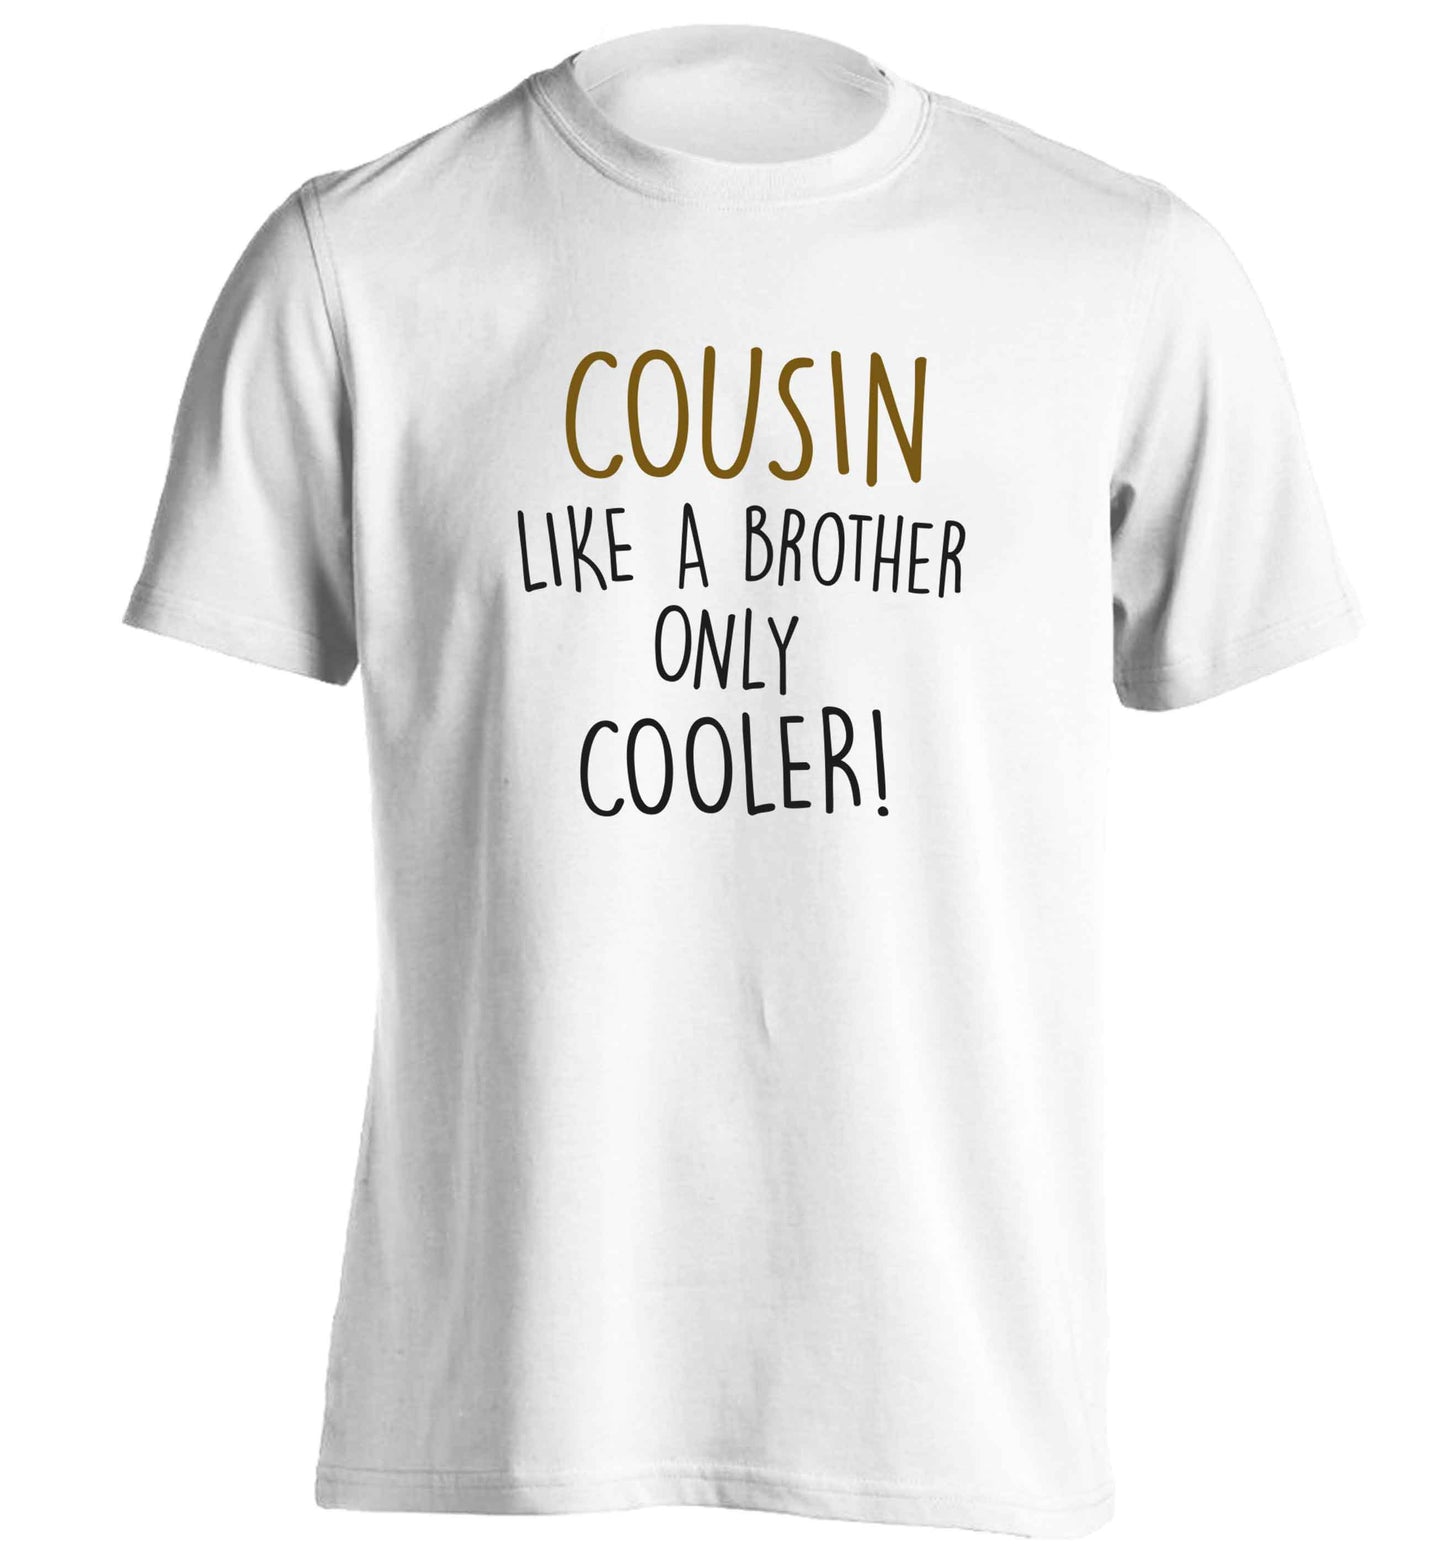 Cousin like a brother only cooler adults unisex white Tshirt 2XL